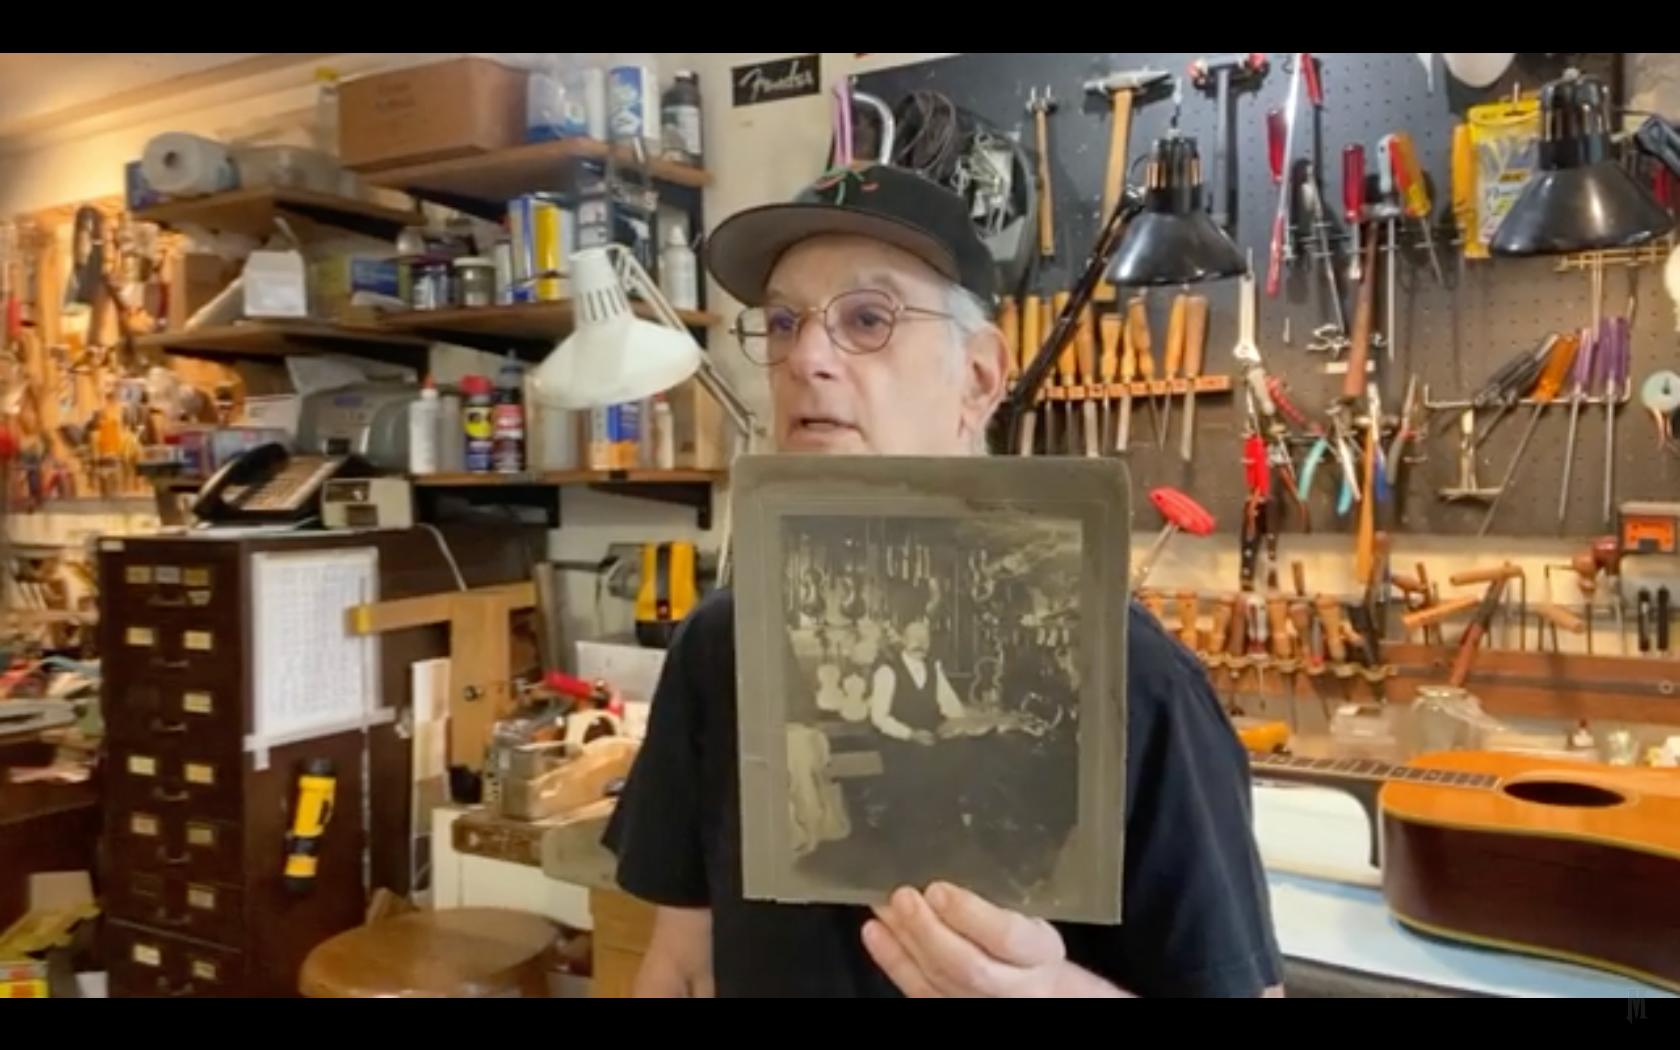 Load video: Matt discovers Schroeder’s name branding iron by chance in an antique shop in upstate New York.